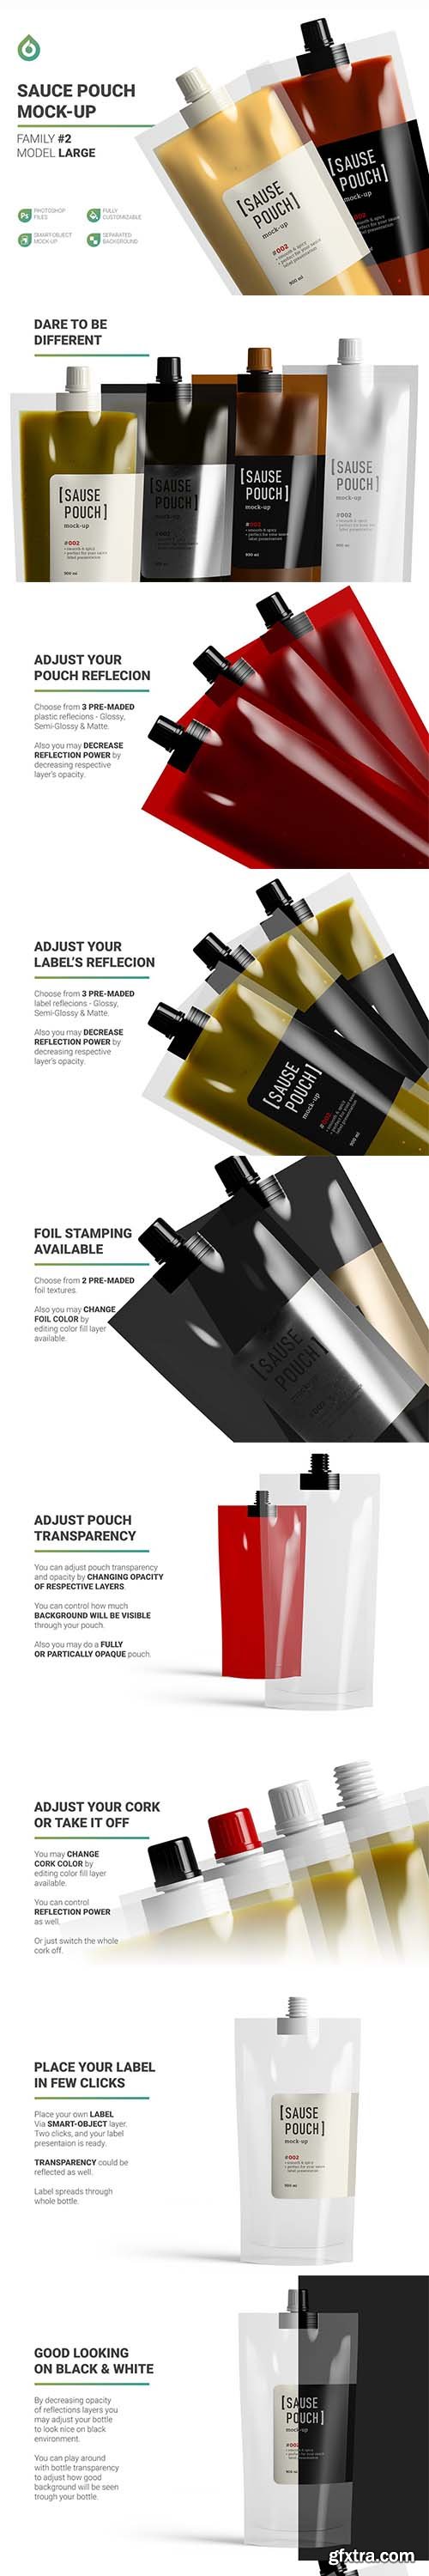 CreativeMarket - Sauce Doypack Pouch Mockup 5704035